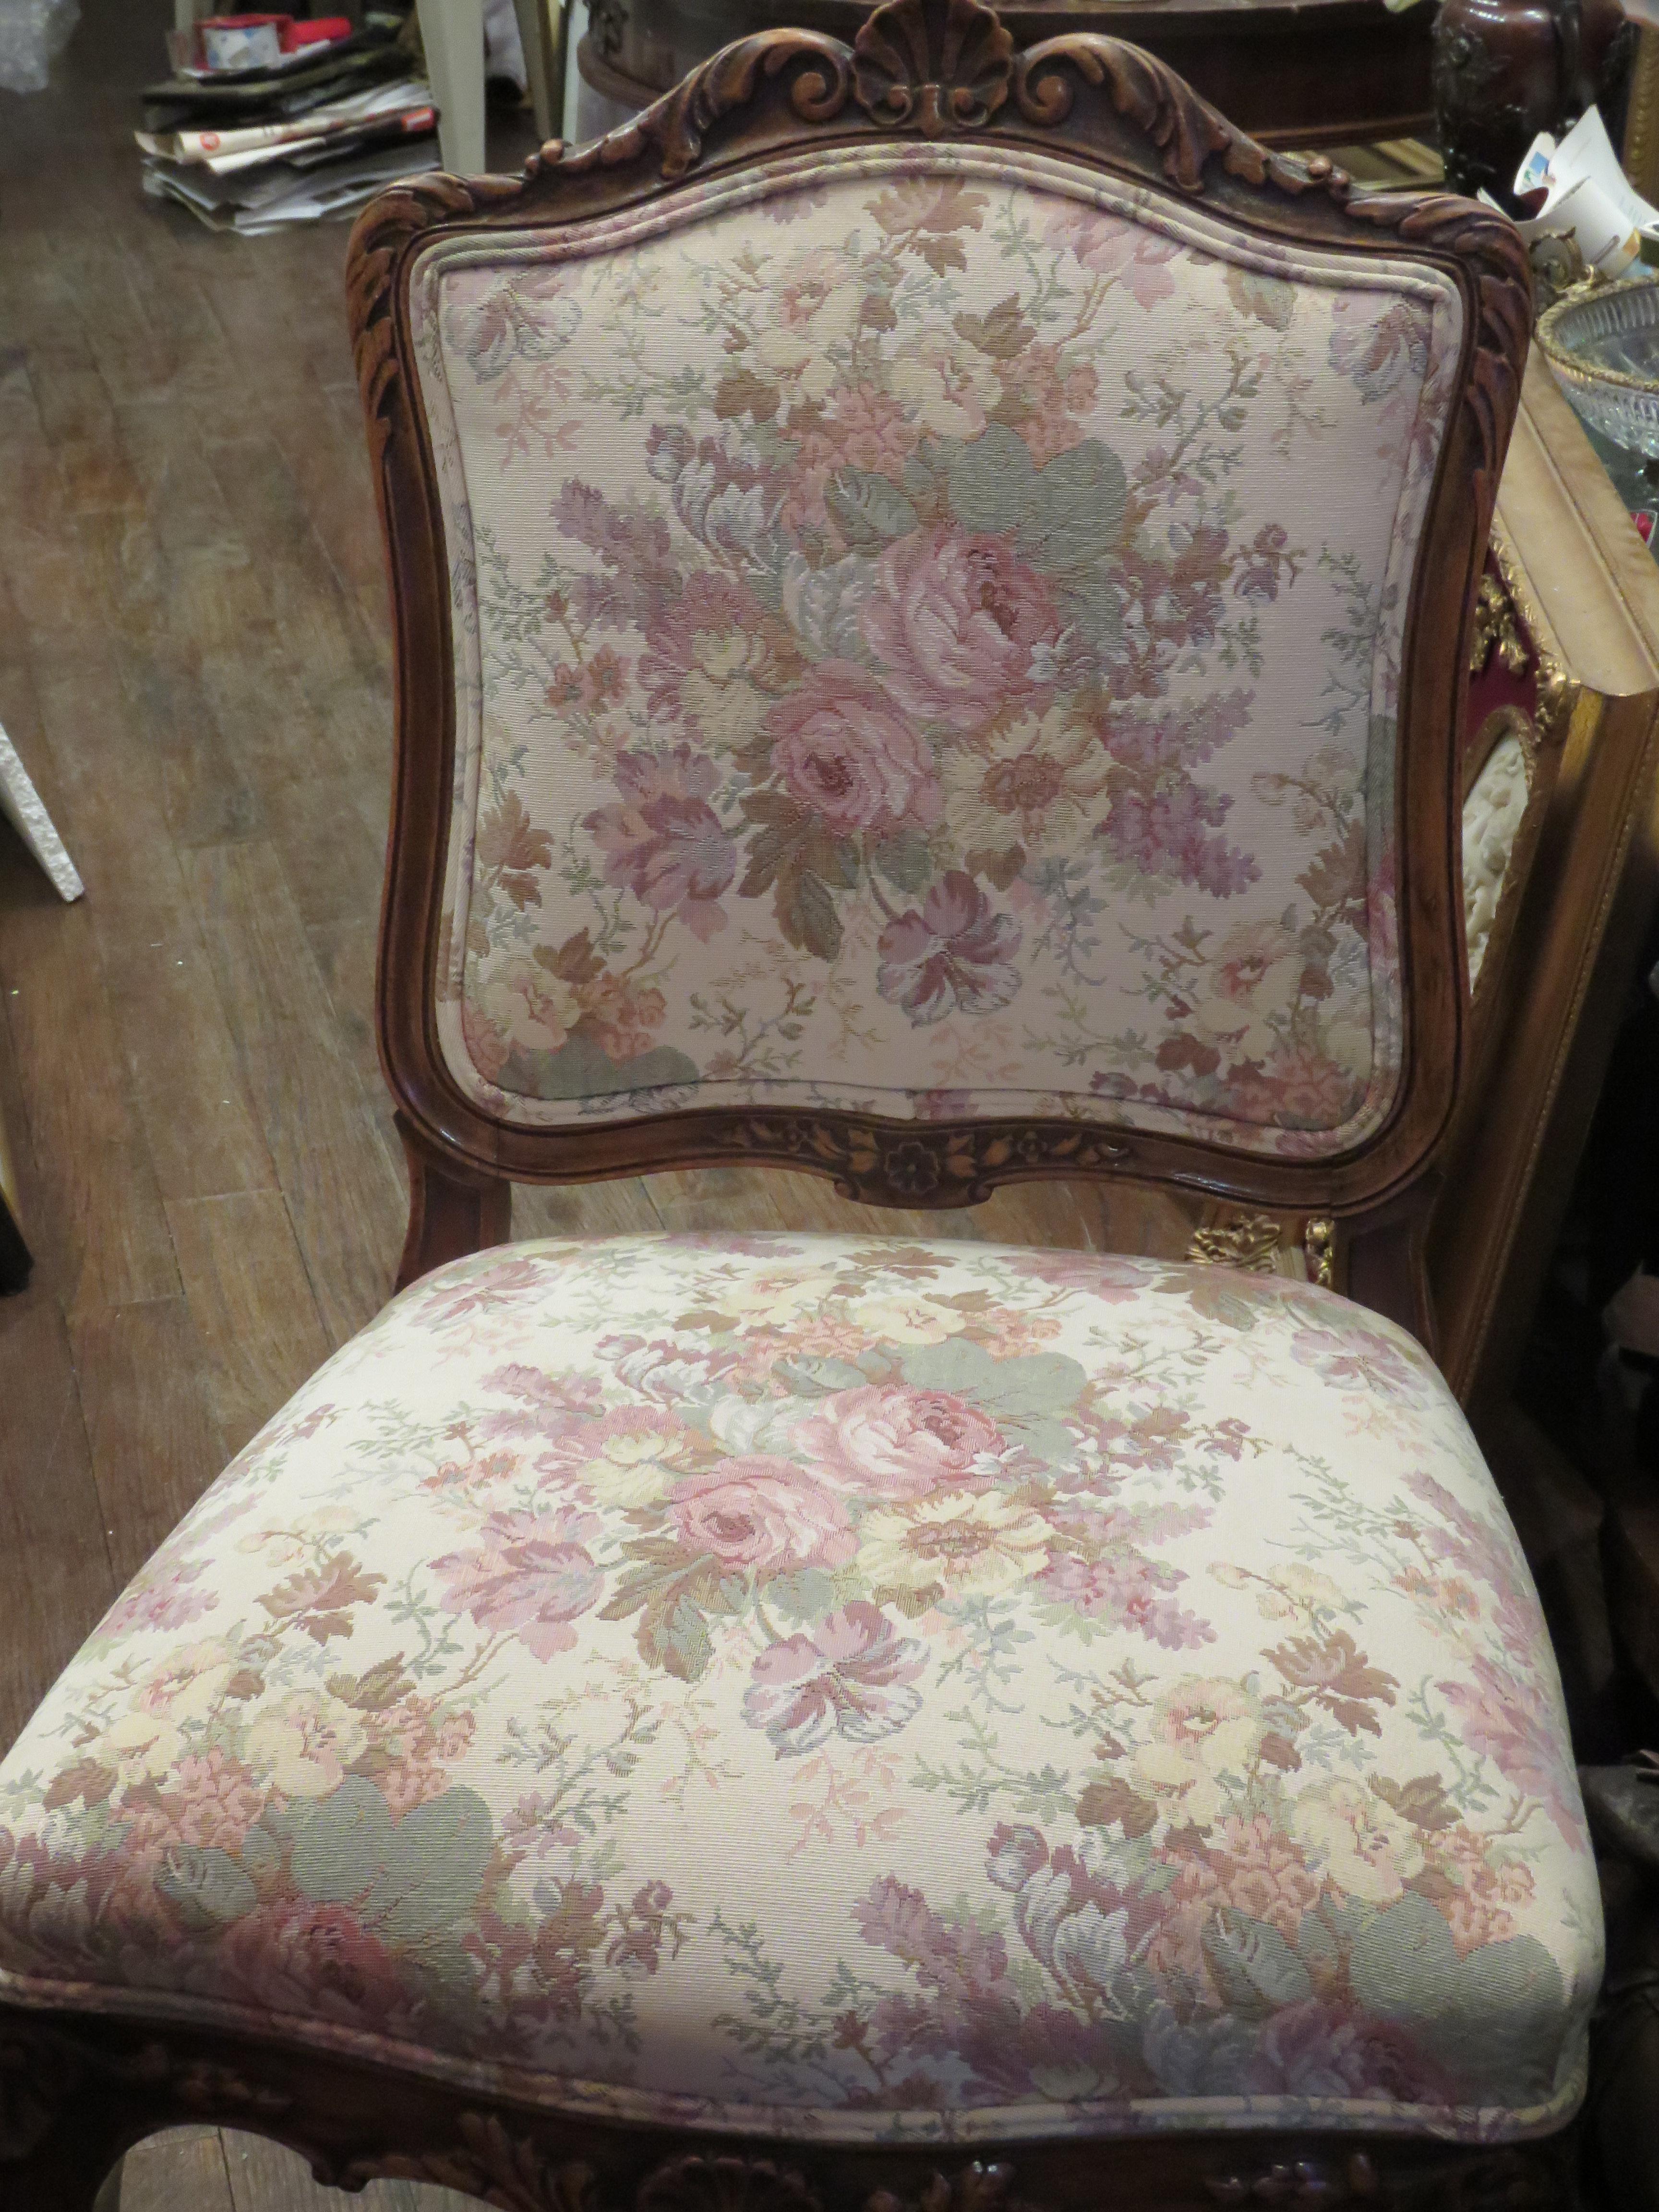 The Following Item we are Offering is Rare Pair of Important Fine Estate Antique Victorian Chairs. Both chairs with a scrolling crest above and on Chair legs with carved designs and Beautifully Finished with Fine French Tapestry Upholstery. Original